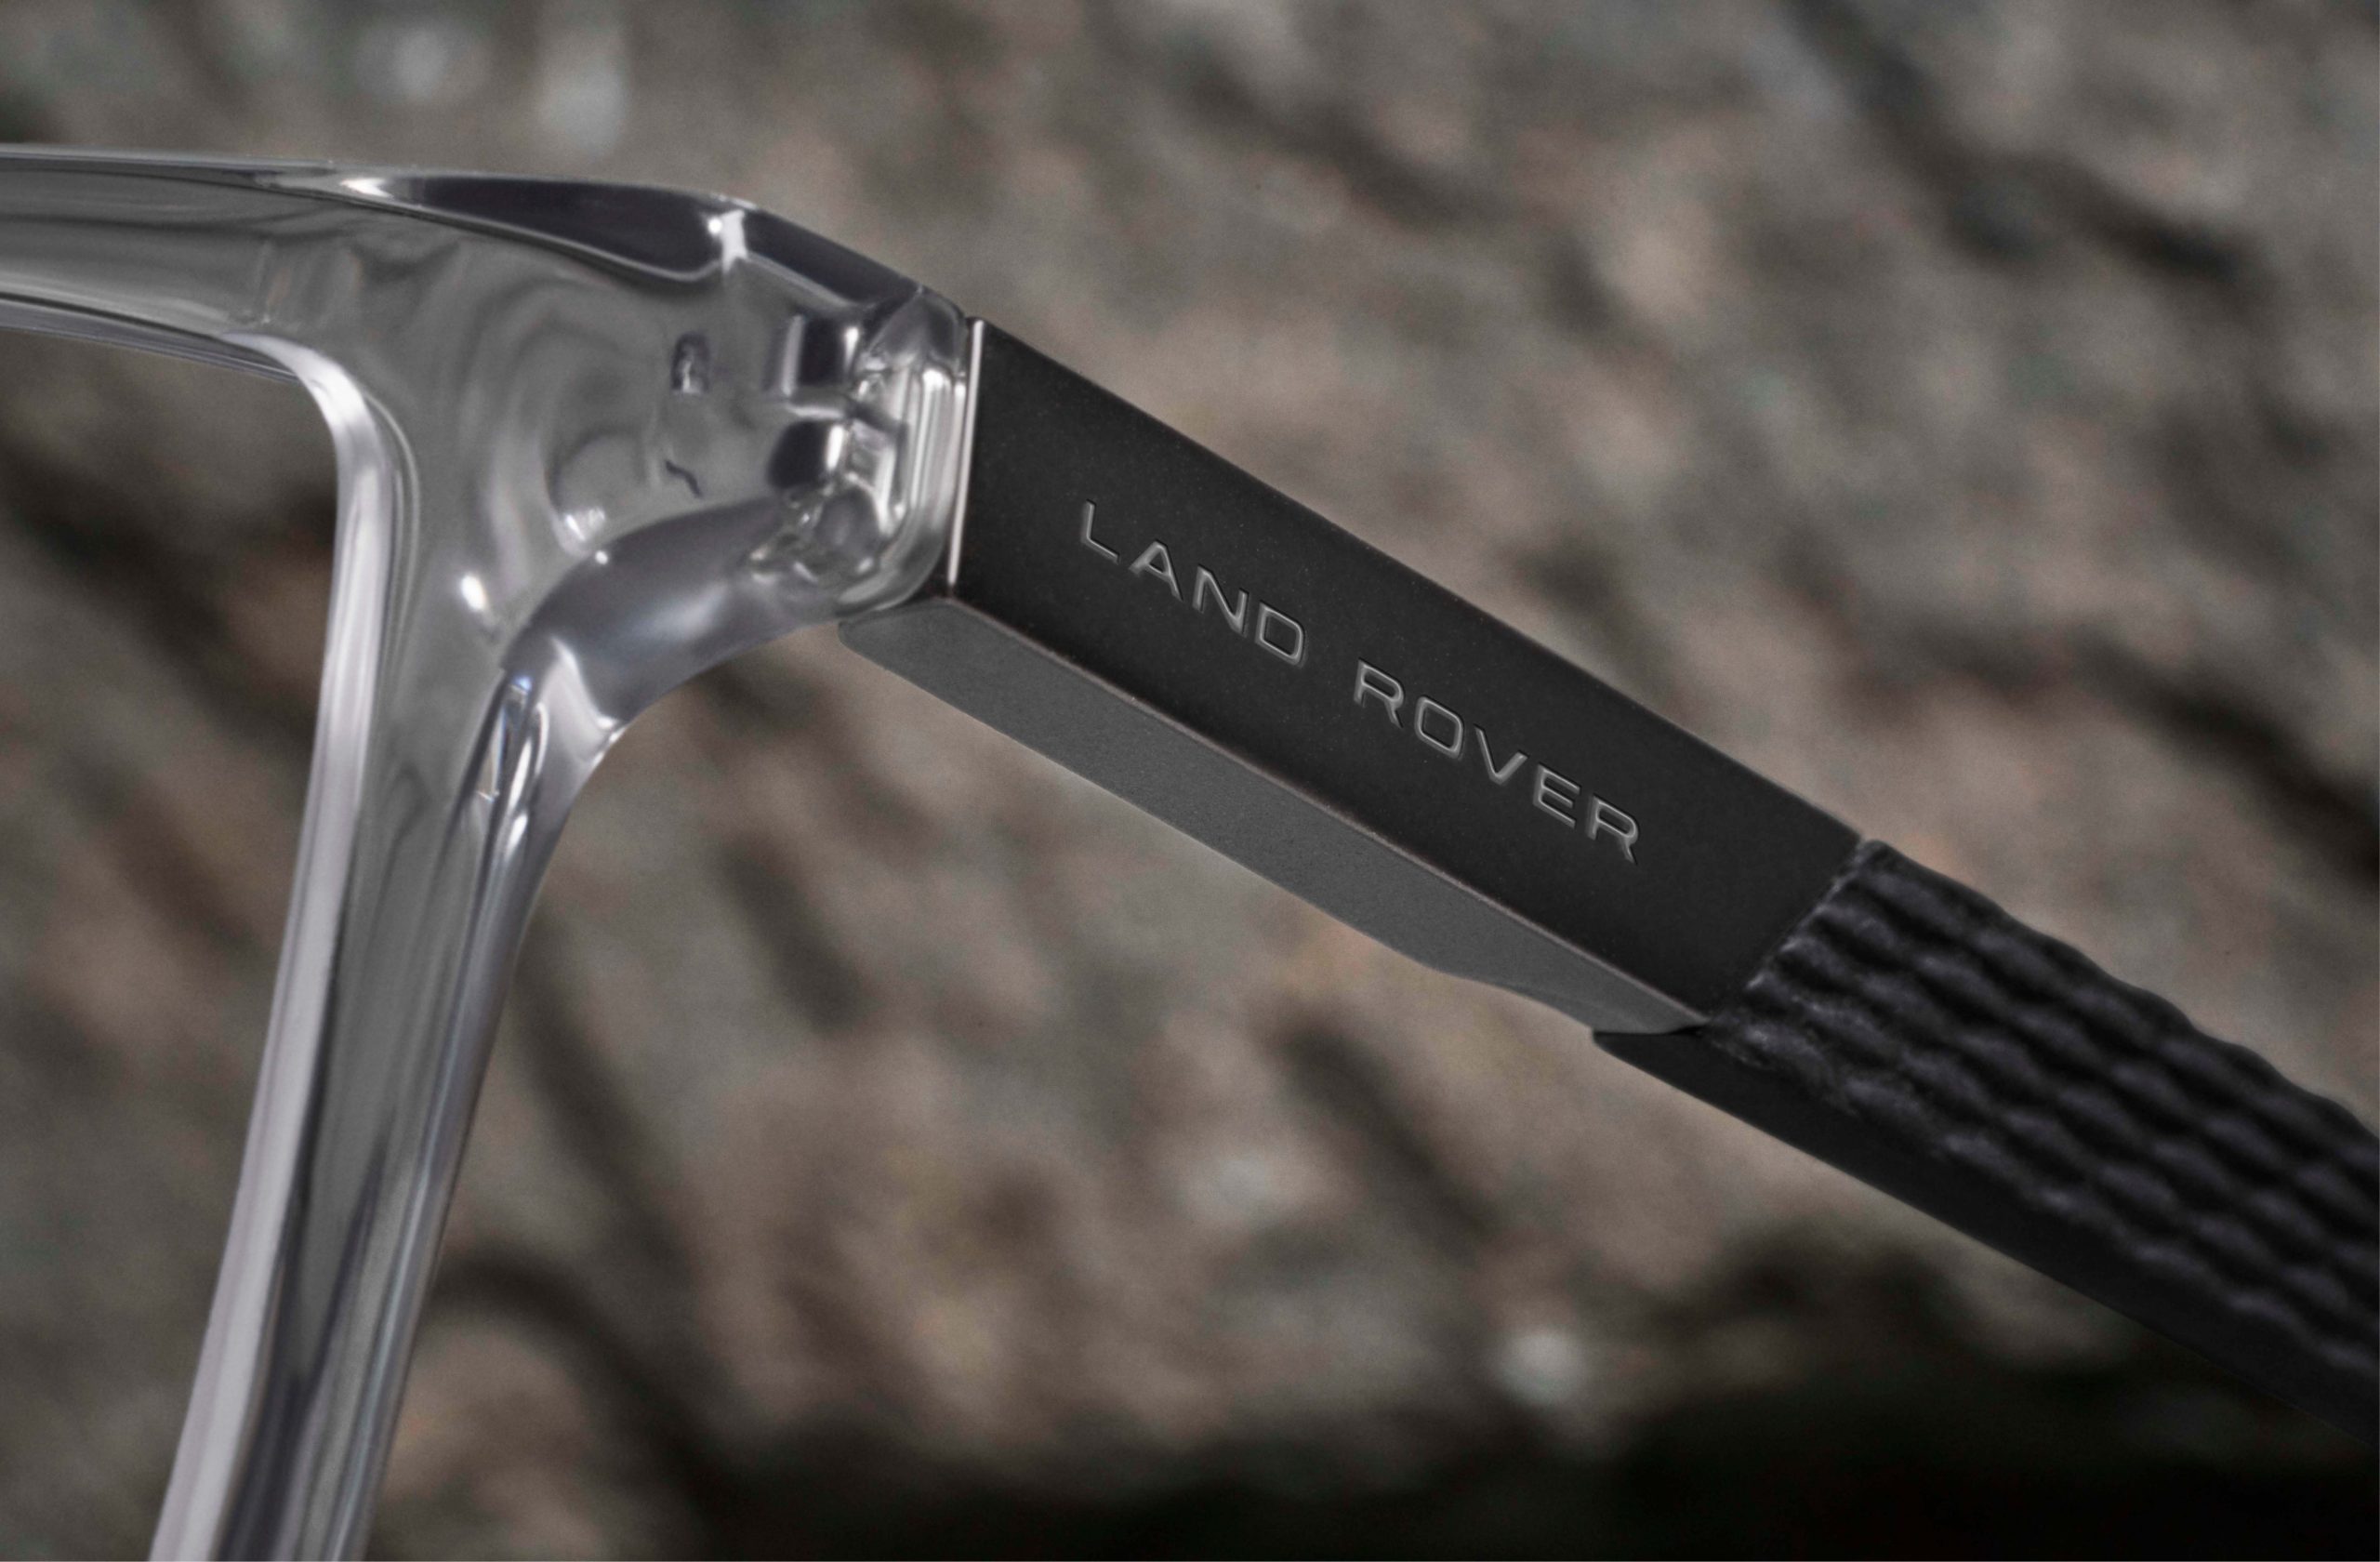 Inspiration from the Great Outdoors. Image shows close up of Land Rover model Errol in grey crystal